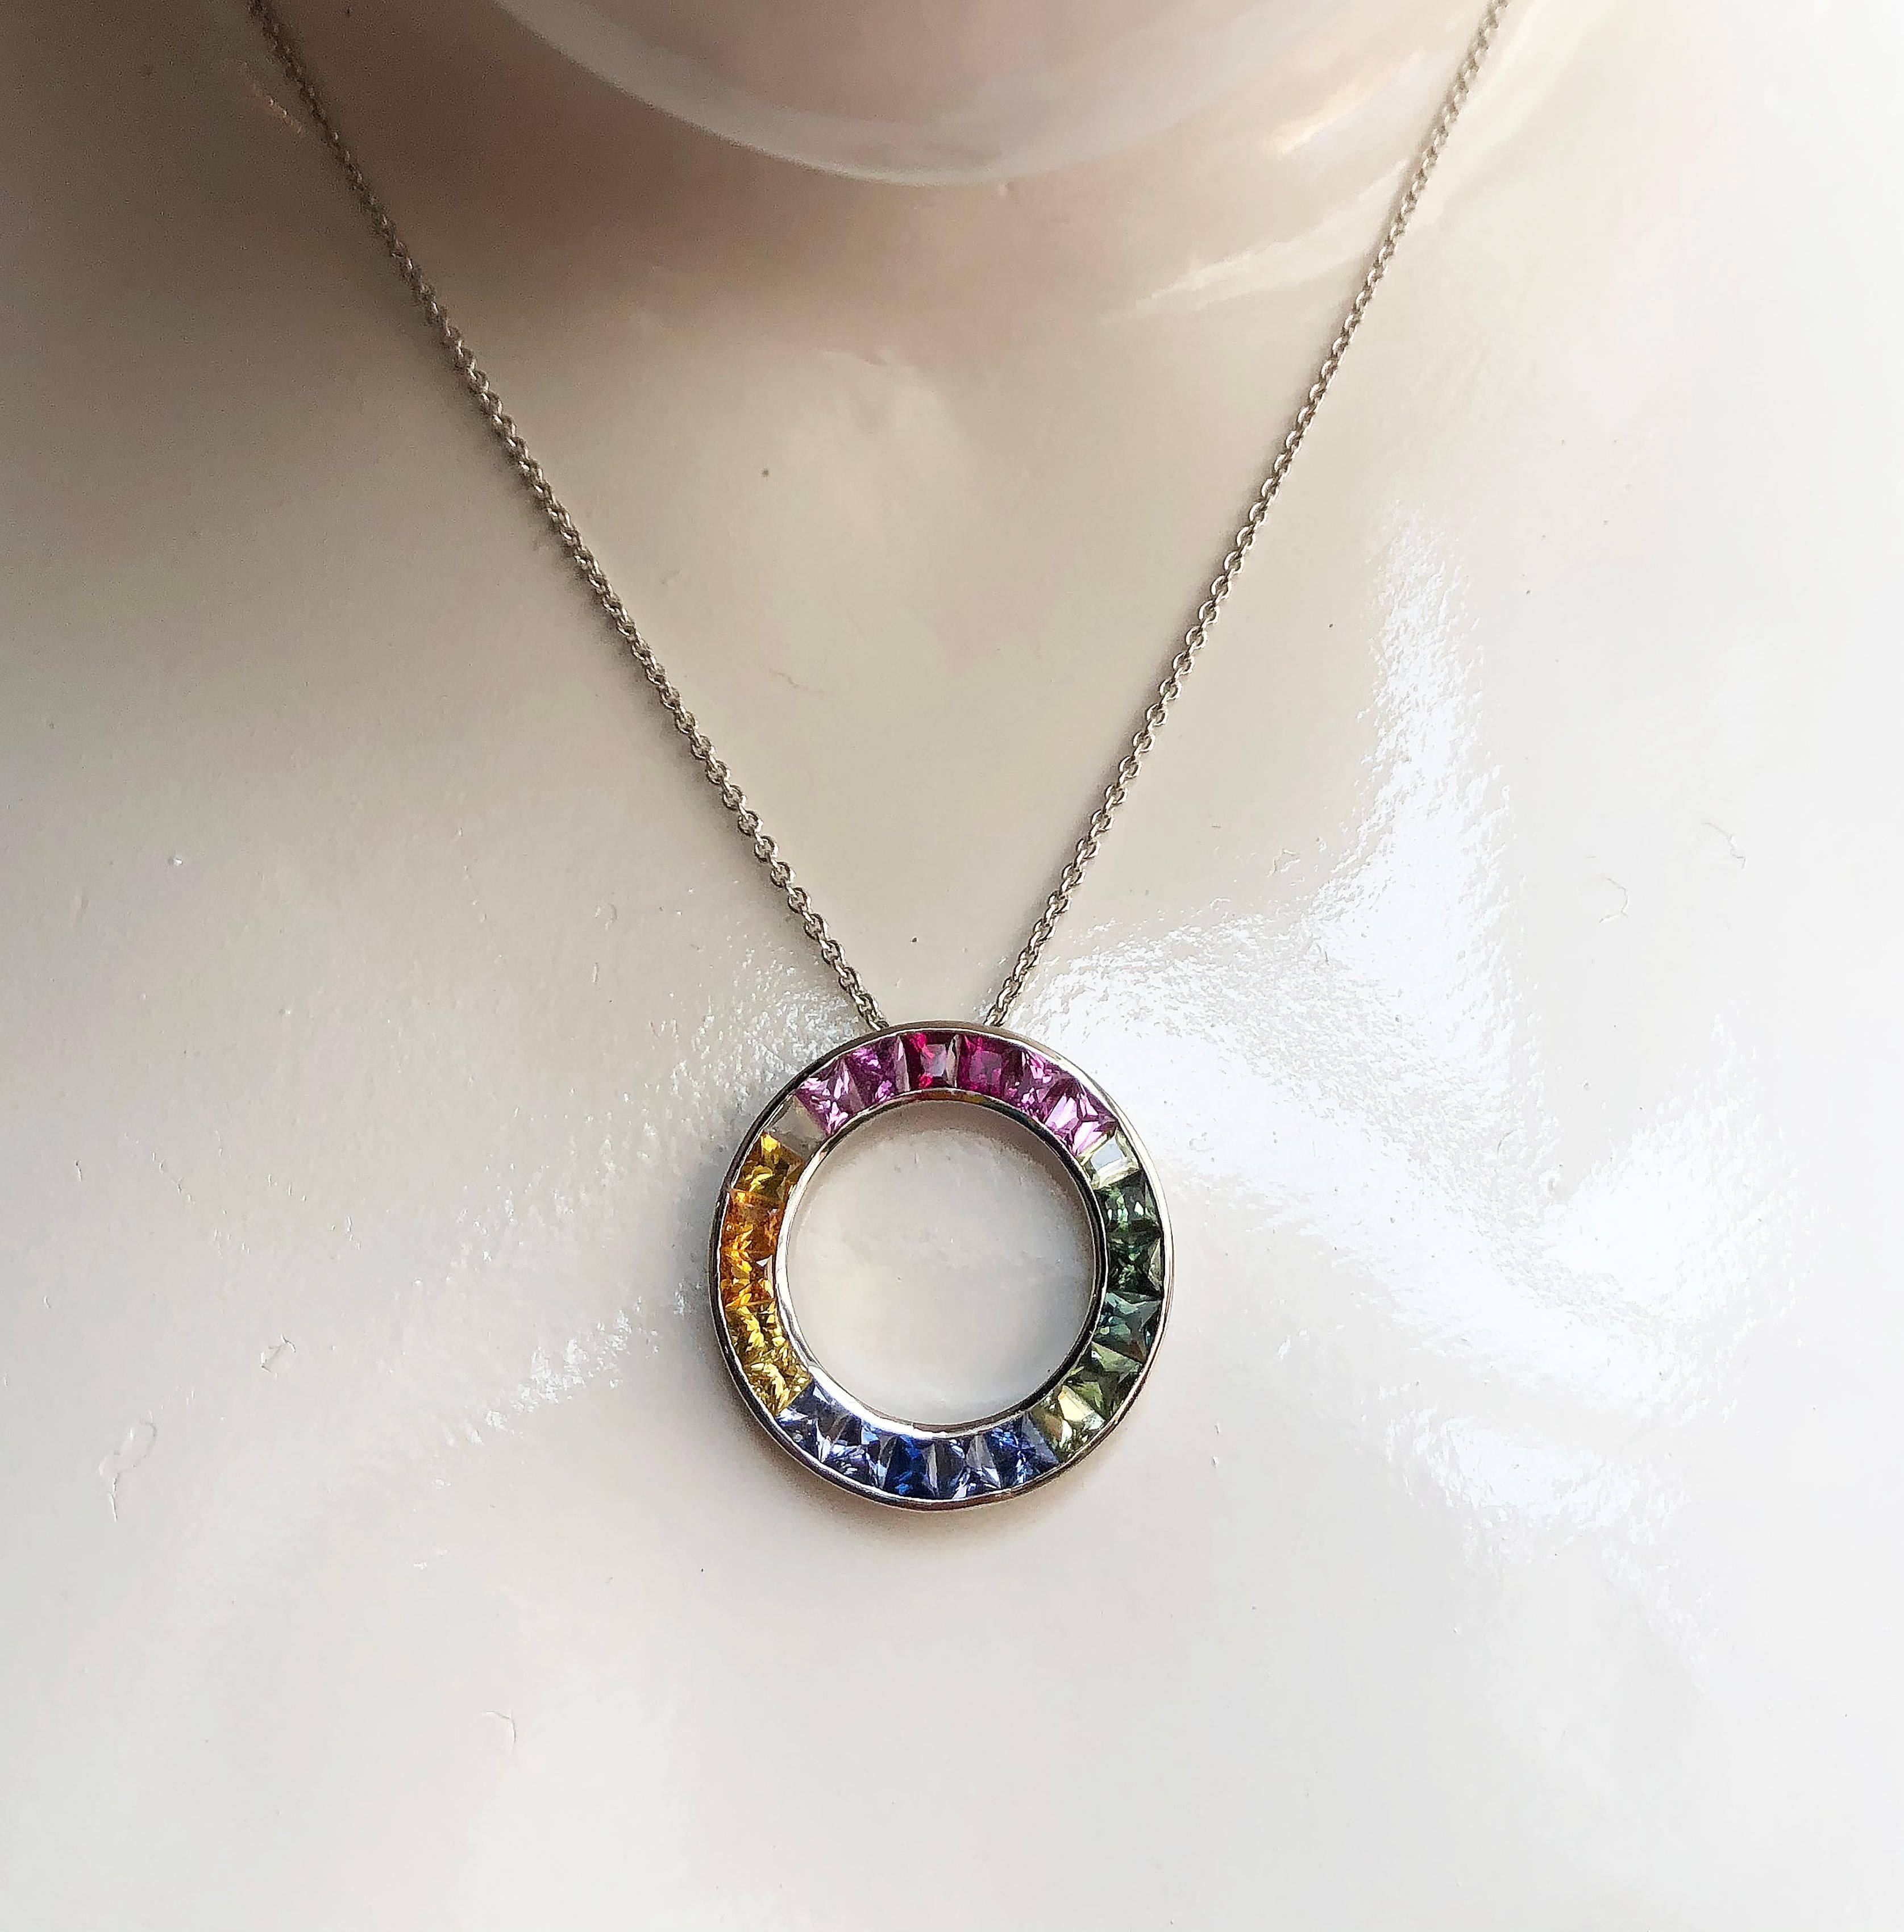 Rainbow Colour Sapphire 6.22 carats Pendant set in 18 Karat White Gold Settings
(chain not included)

Width: 2.5 cm
Length: 2.5 cm 

